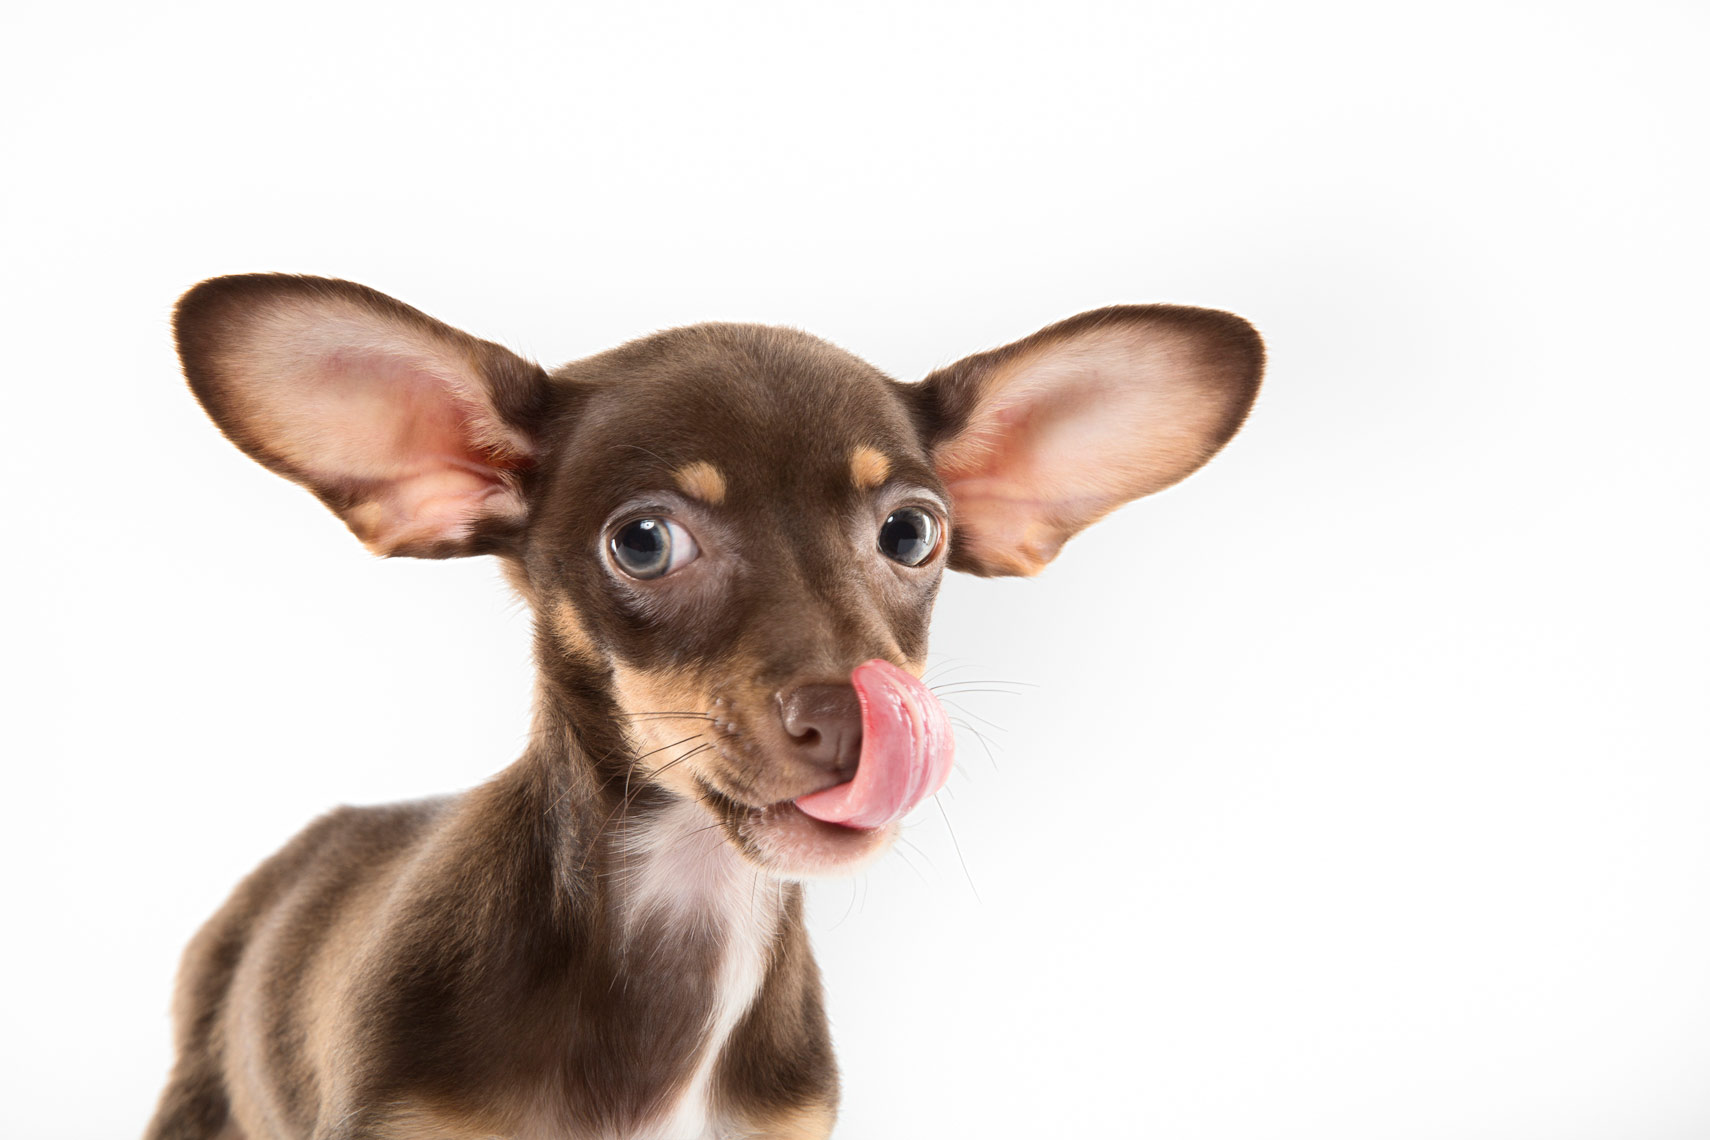 Cute puppy with really big ears and a big tongue